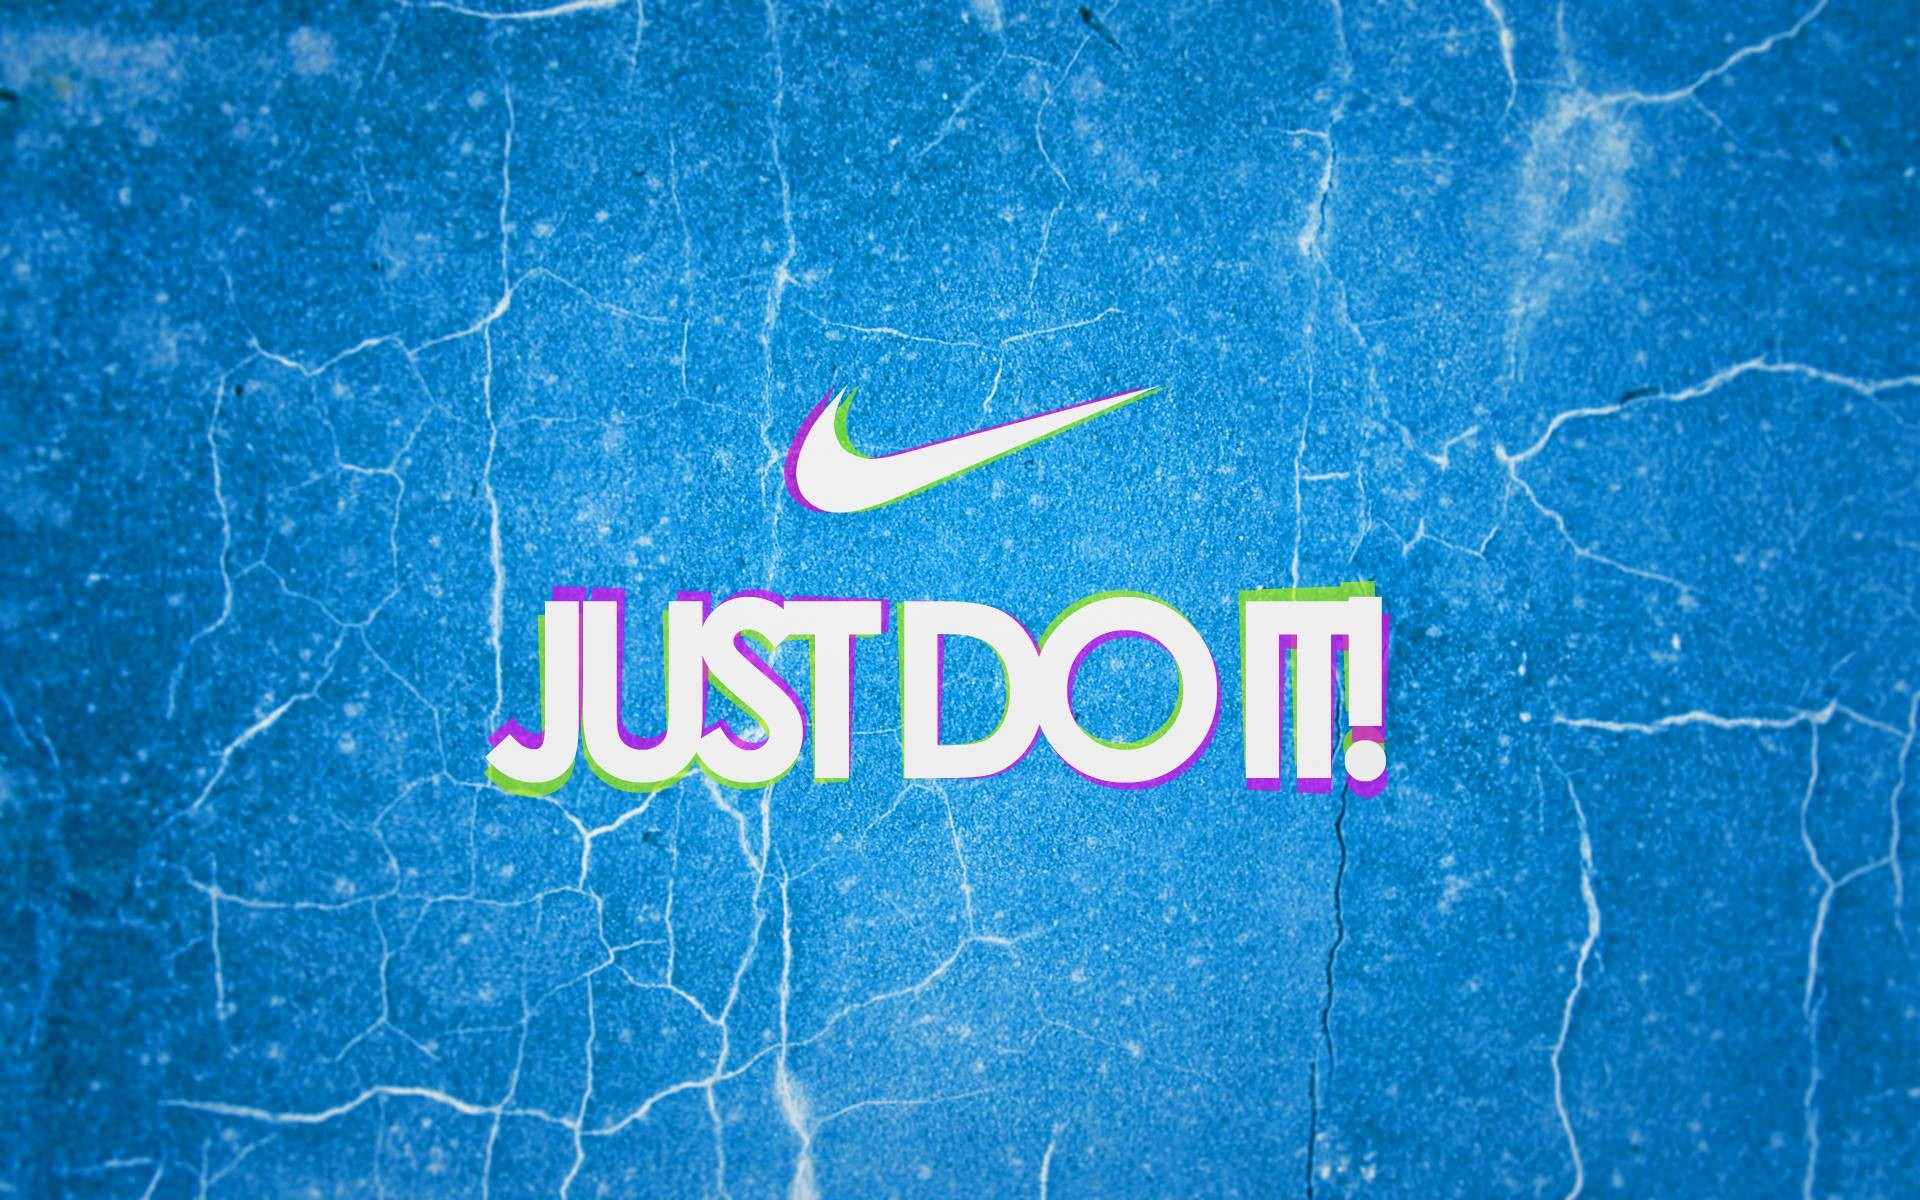 Nike Wallpapers Just Do It – Wallpaper Cave